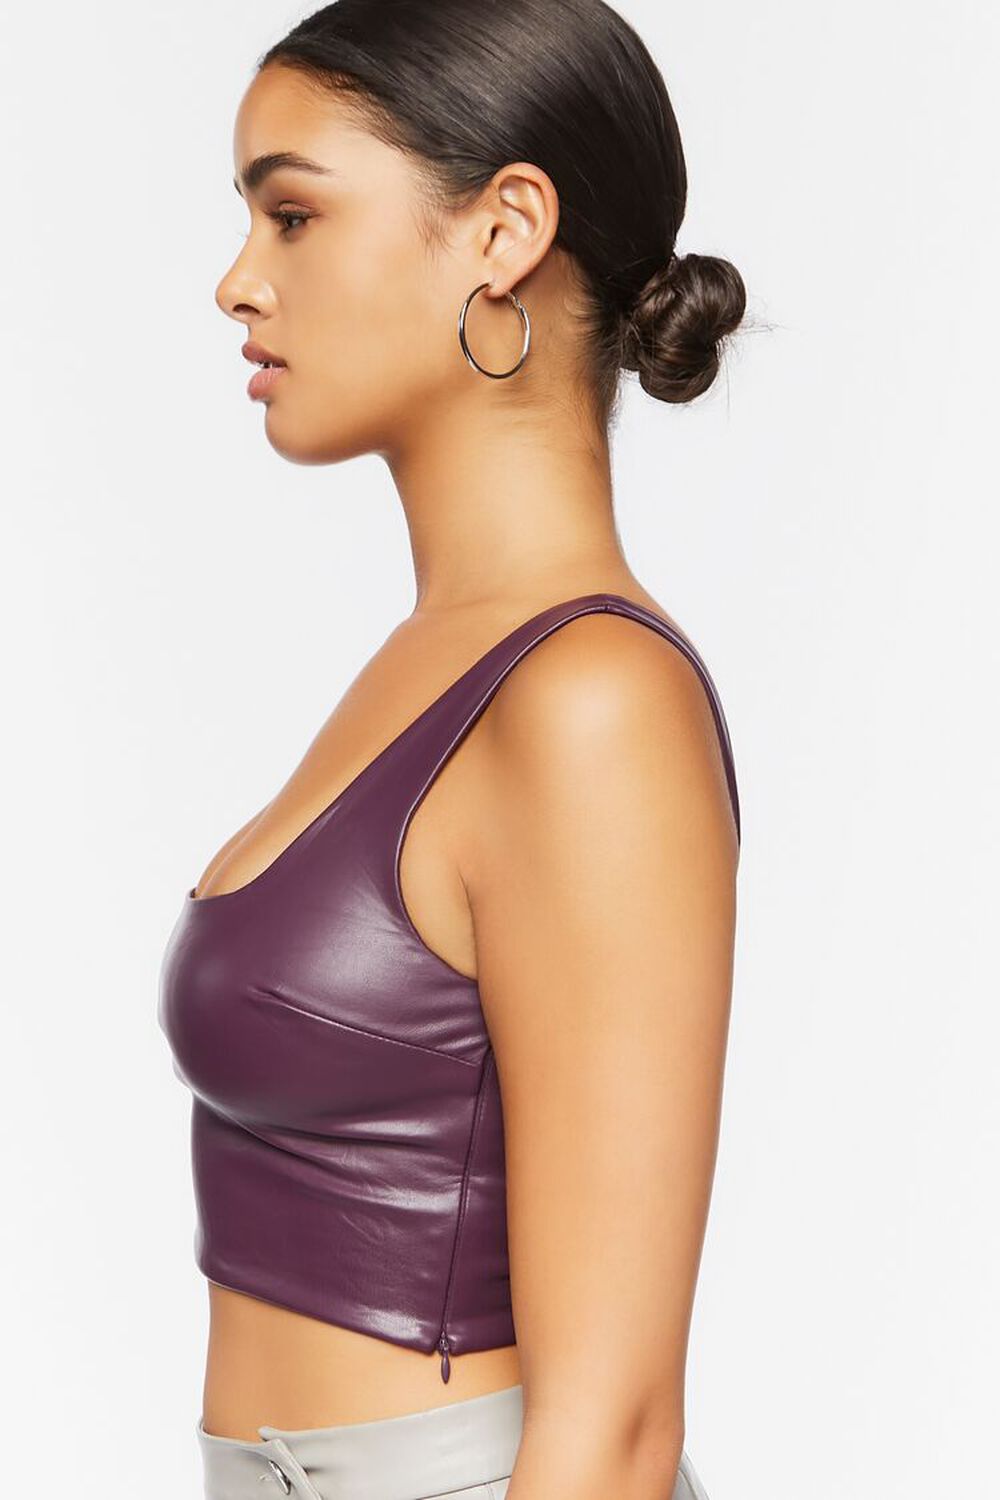 PLUM Faux Leather Cropped Tank Top, image 2